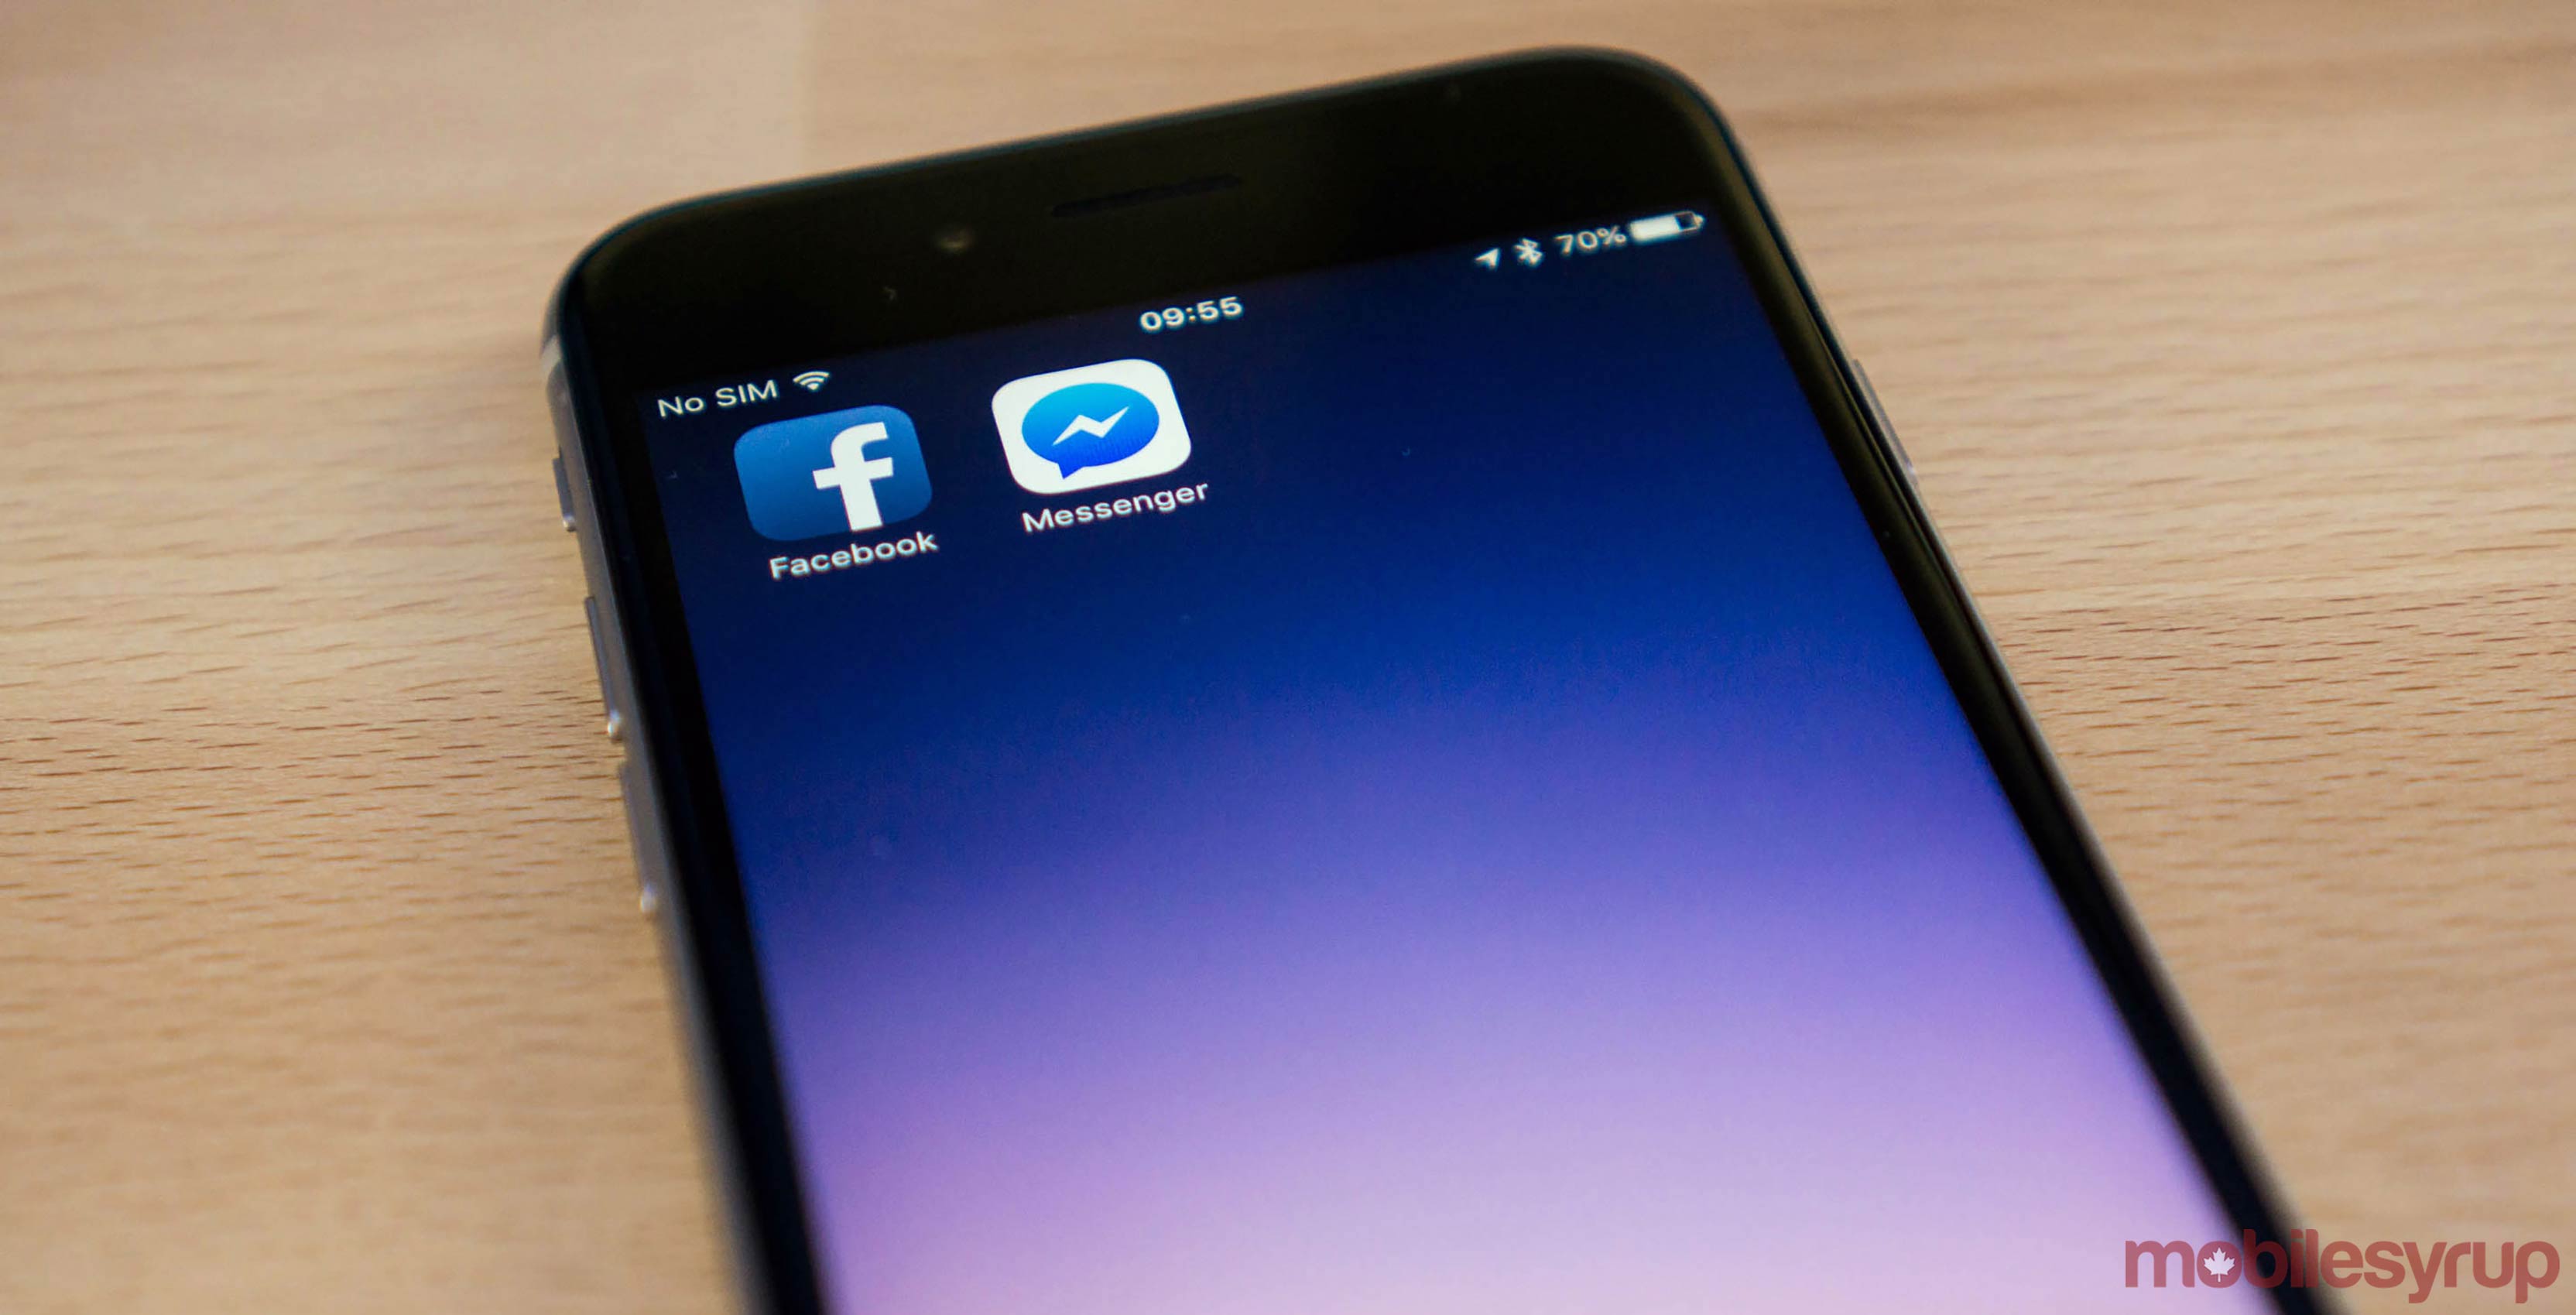 Facebook apps on iPhone